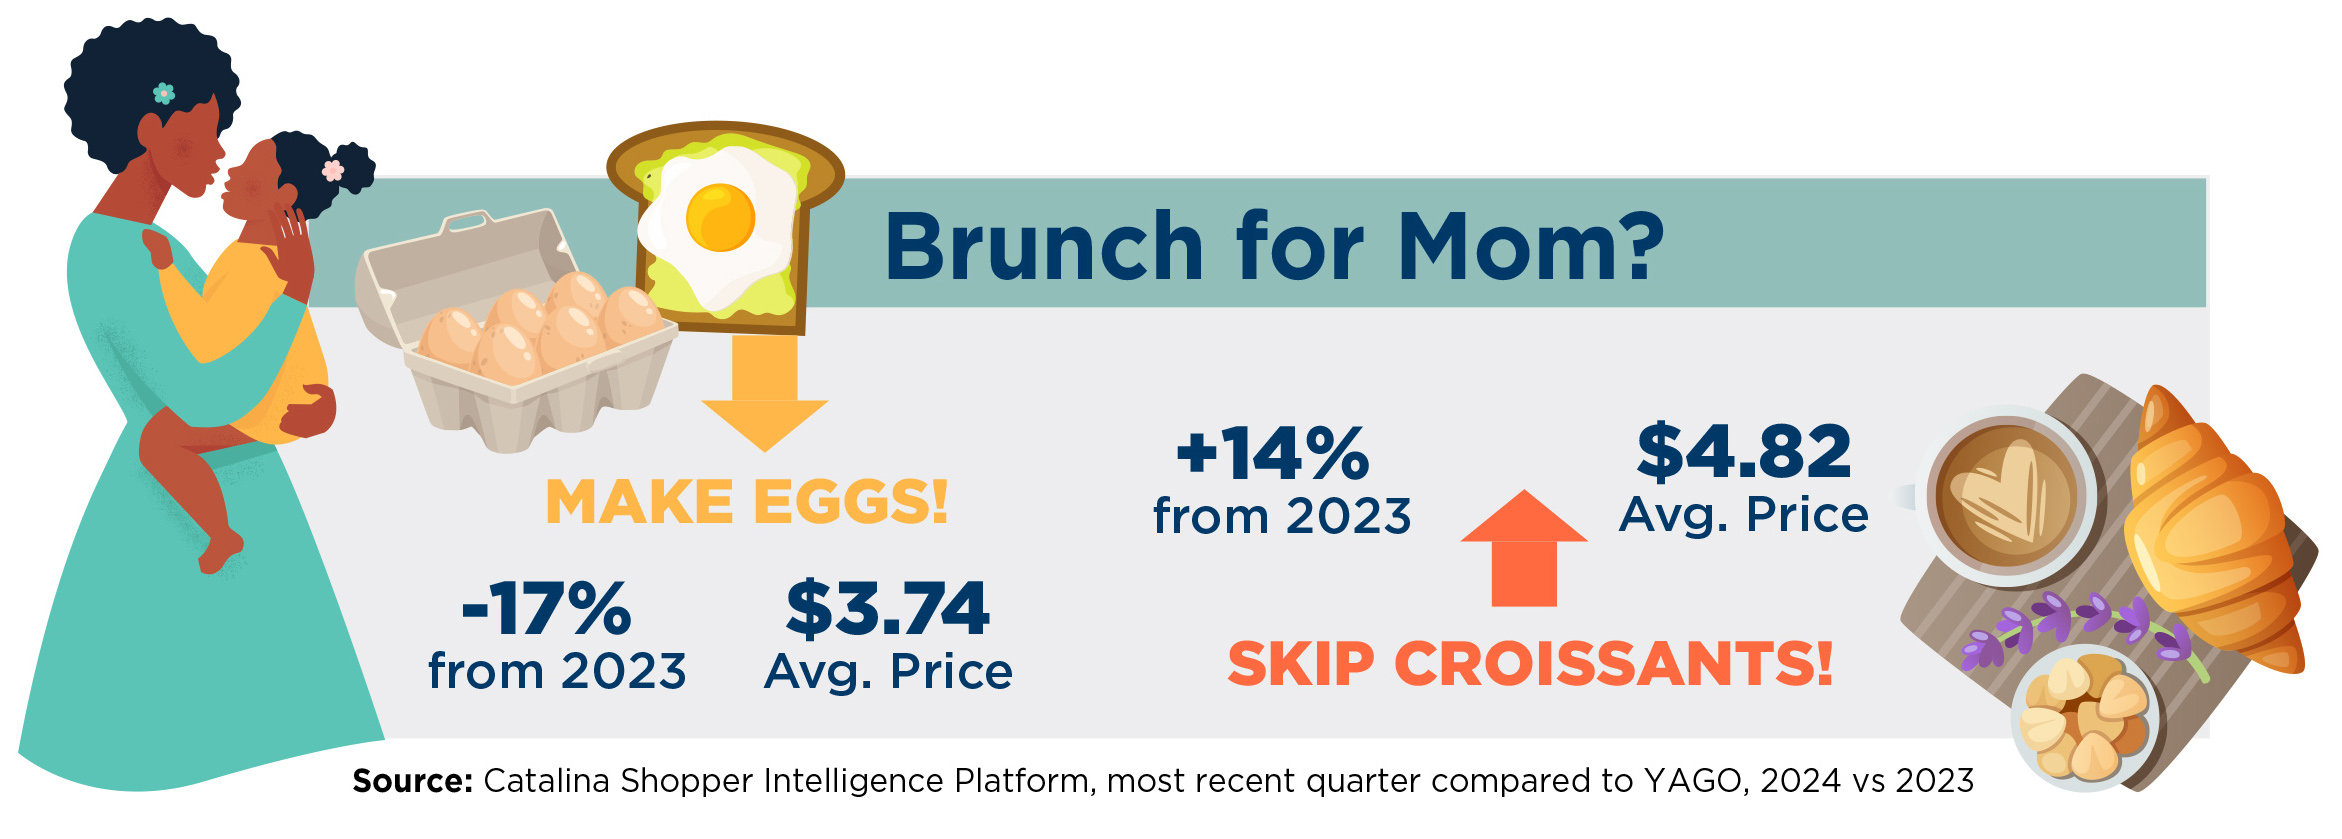 A mother and child next to average prices for Mother’s Day brunch items including eggs and croissants.